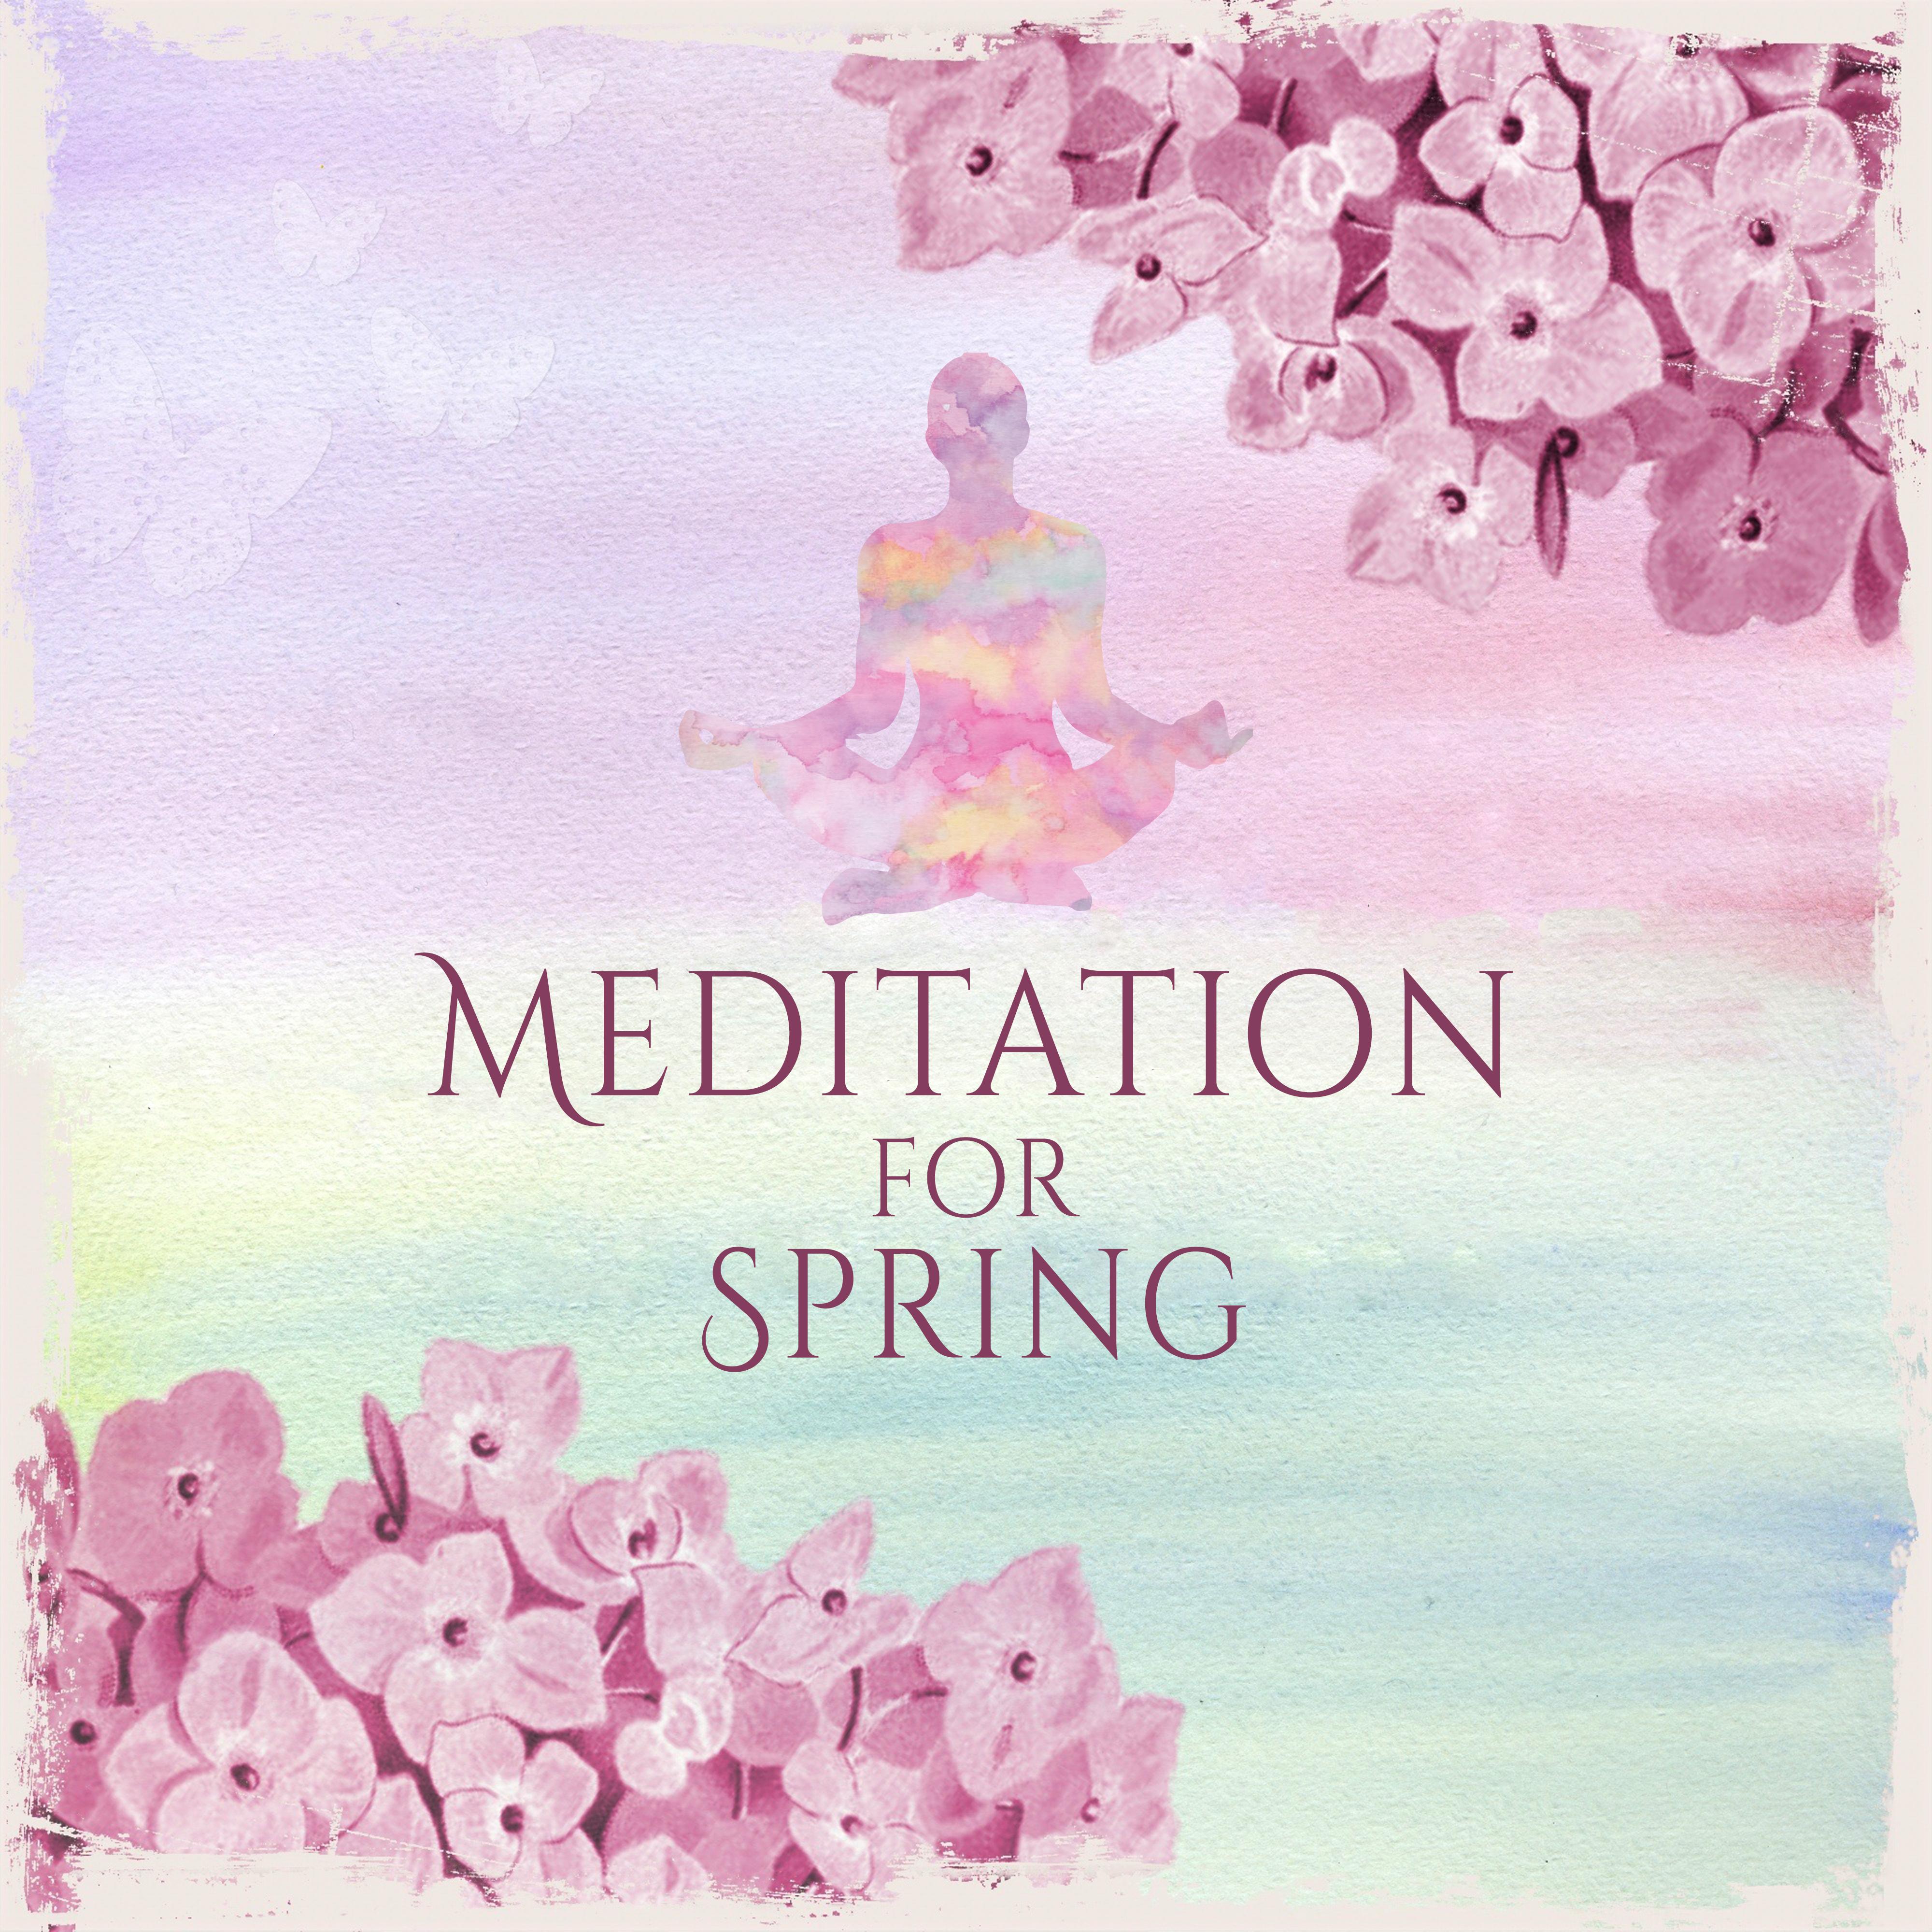 Meditation for Spring – New Age, Natural Sounds, Music for Yoga Meditation, Pilates, Deep Rest, Pure Relaxation